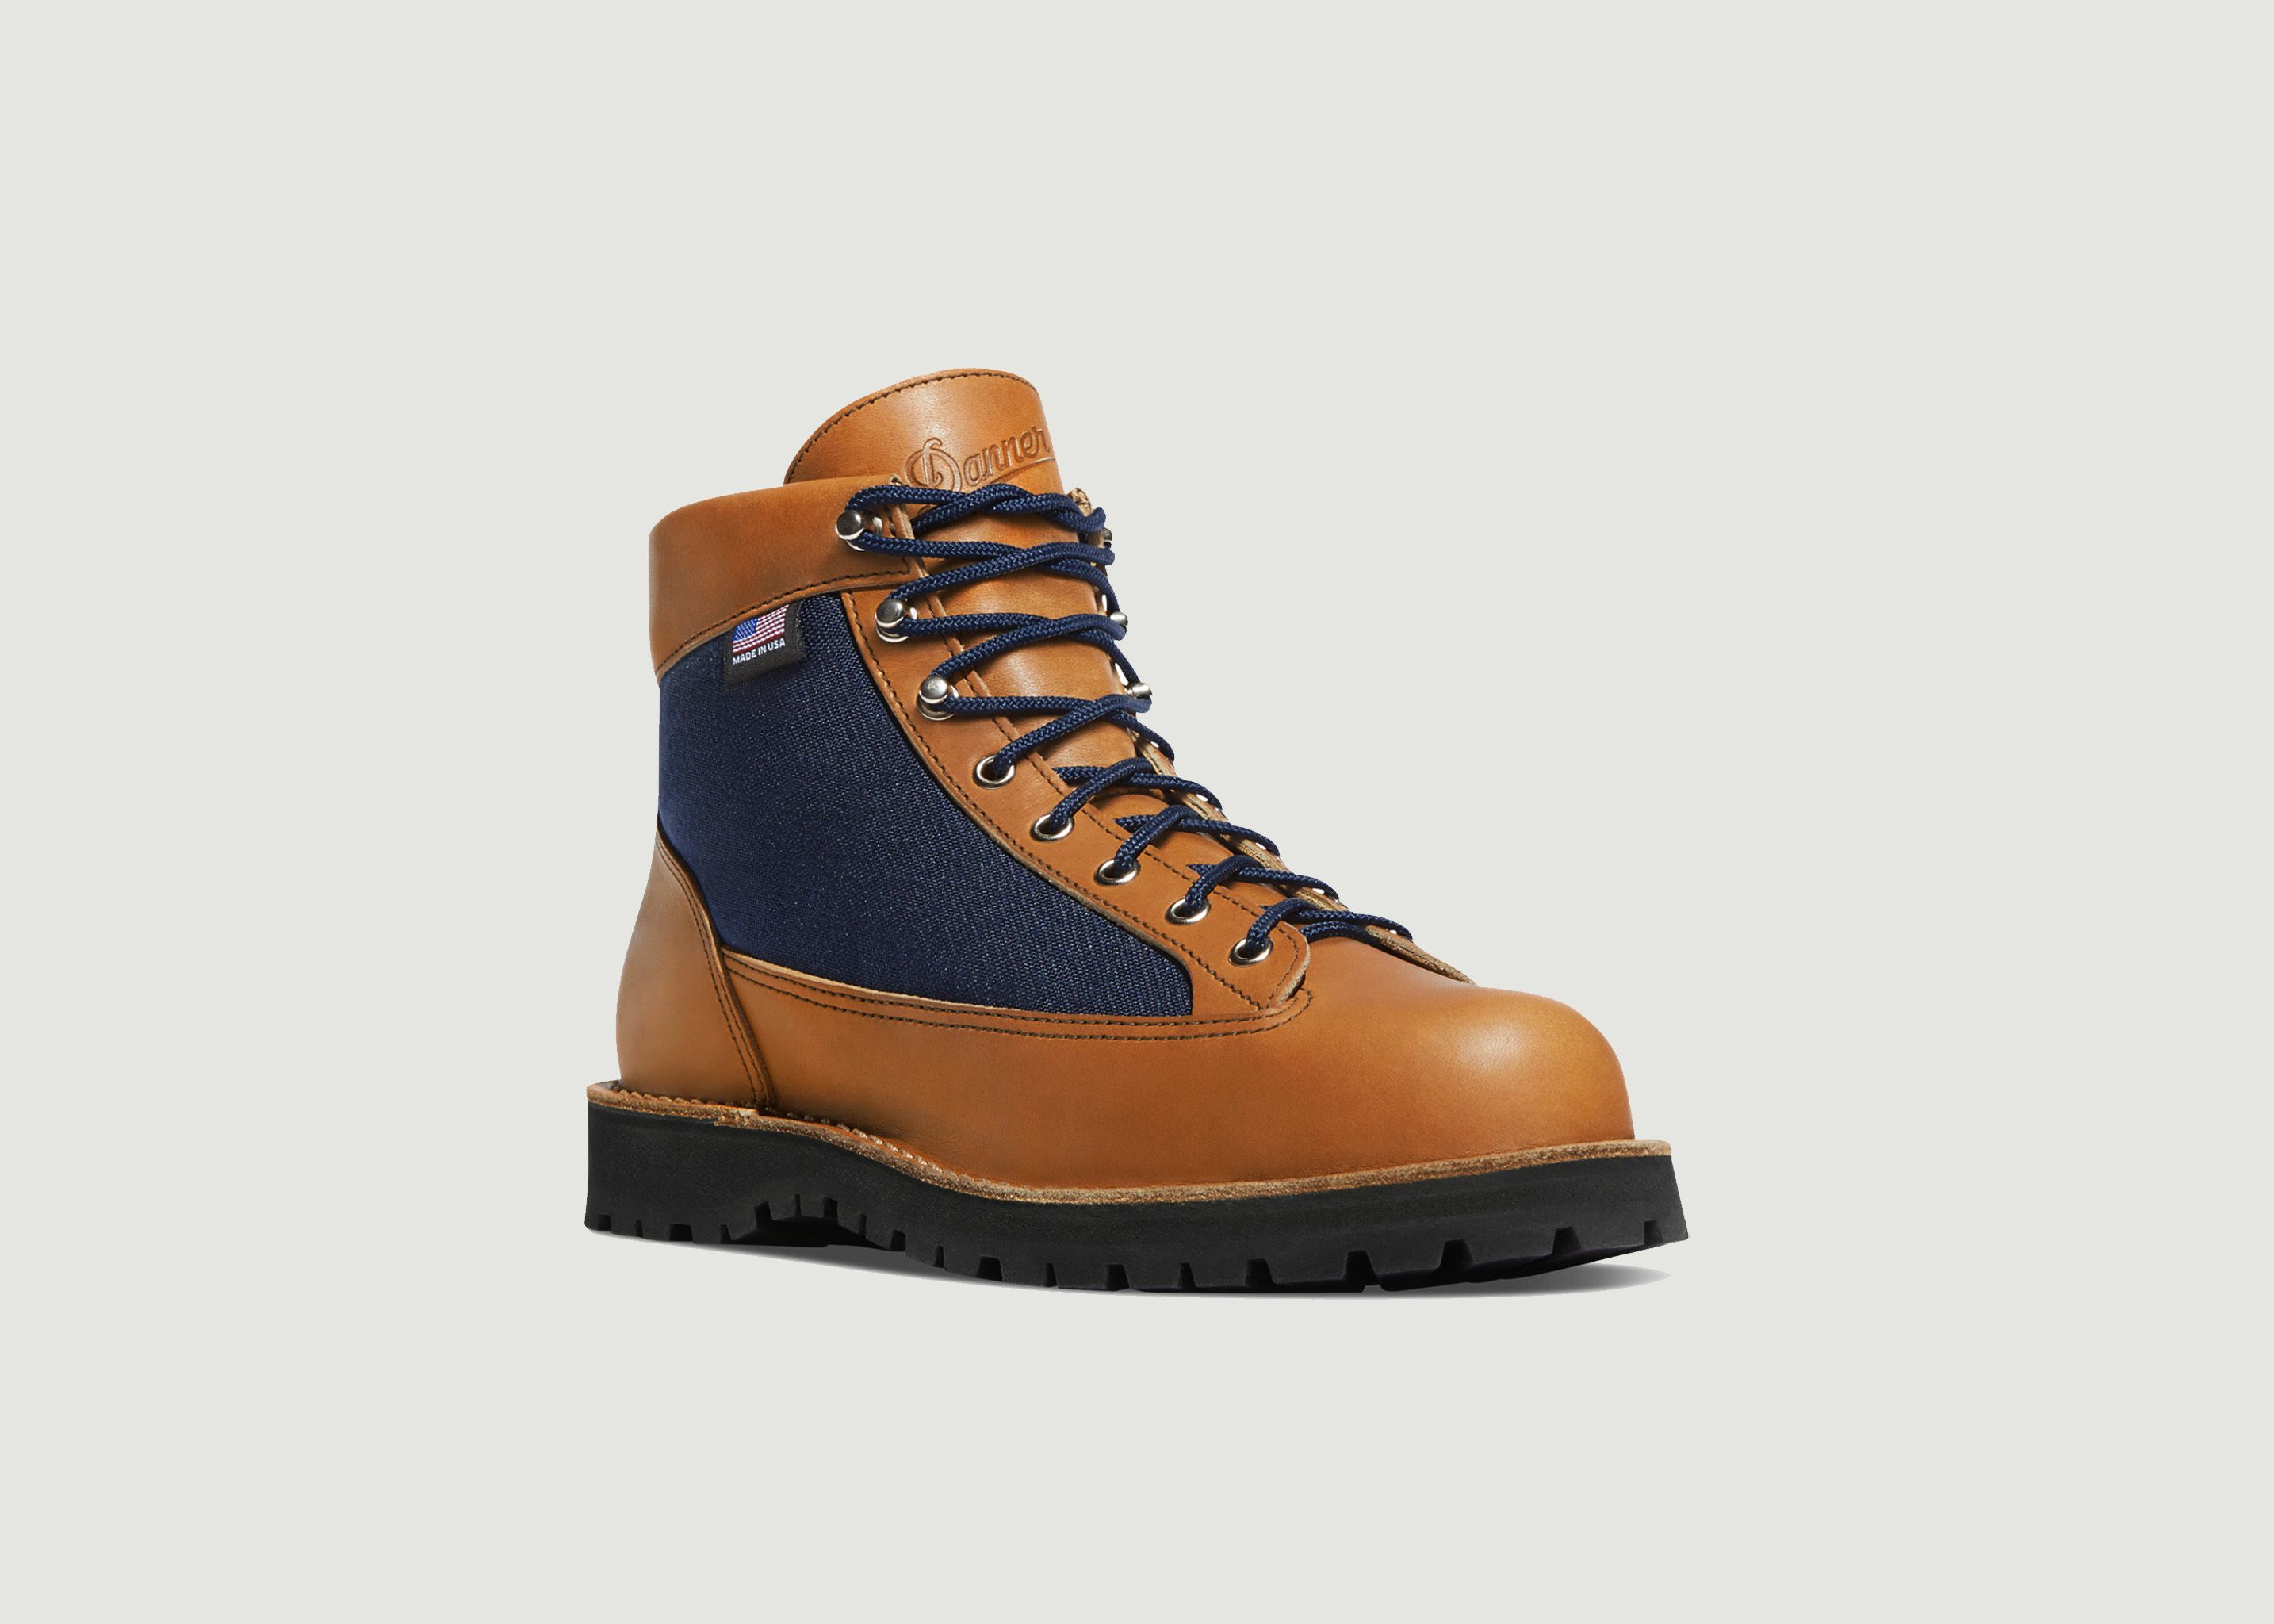 Danner Light denim and leather boots - Danner